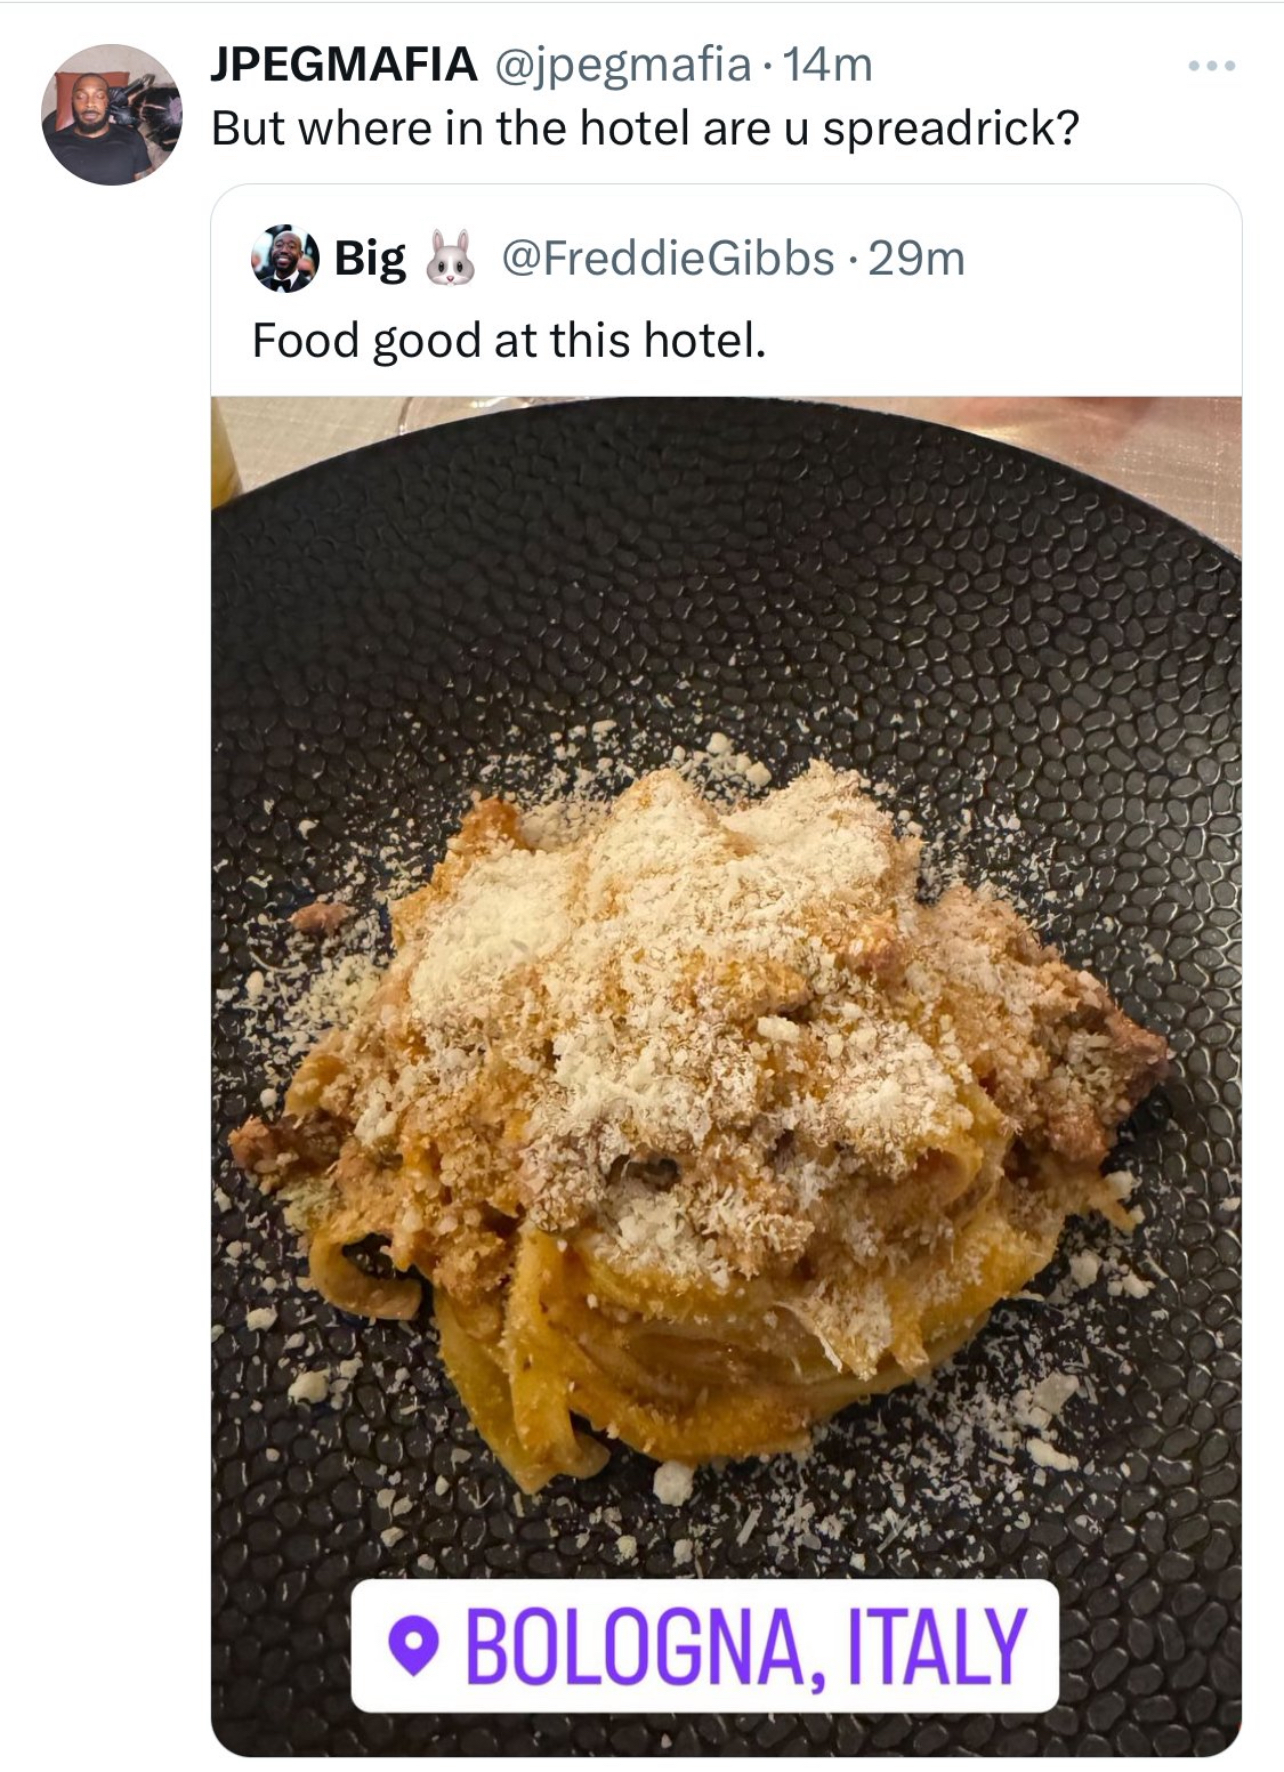 A dish of pasta with grated cheese on top, on a black plate, shown in a tweet conversation